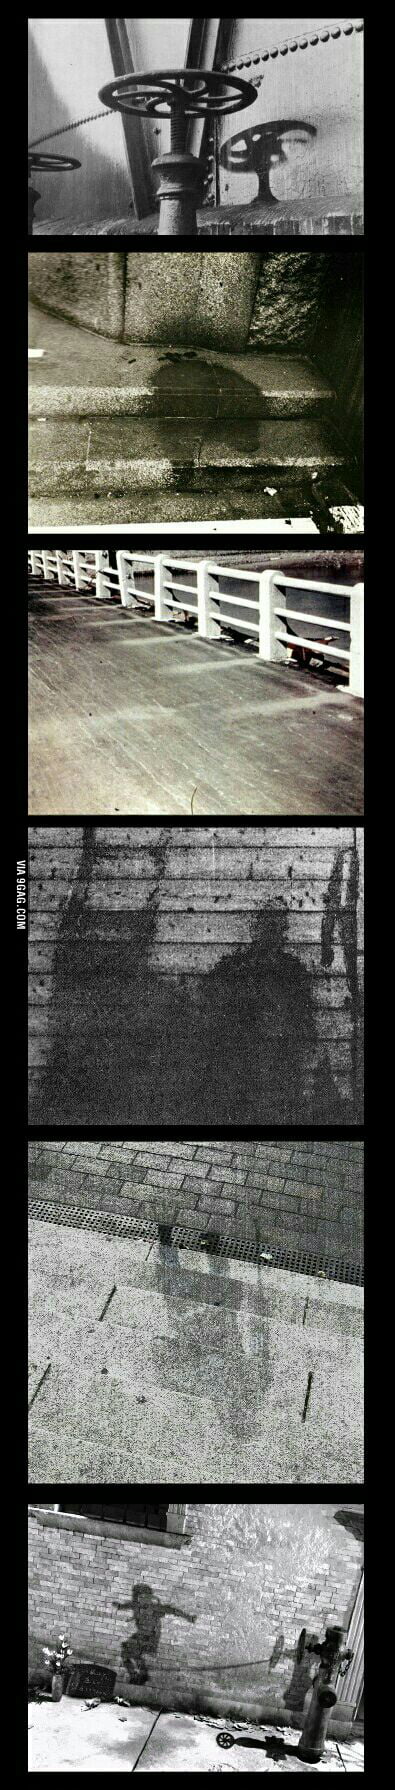 The Hiroshima Shadows Caused By The Radiation Of The Nuclear Explosion 1945 9gag